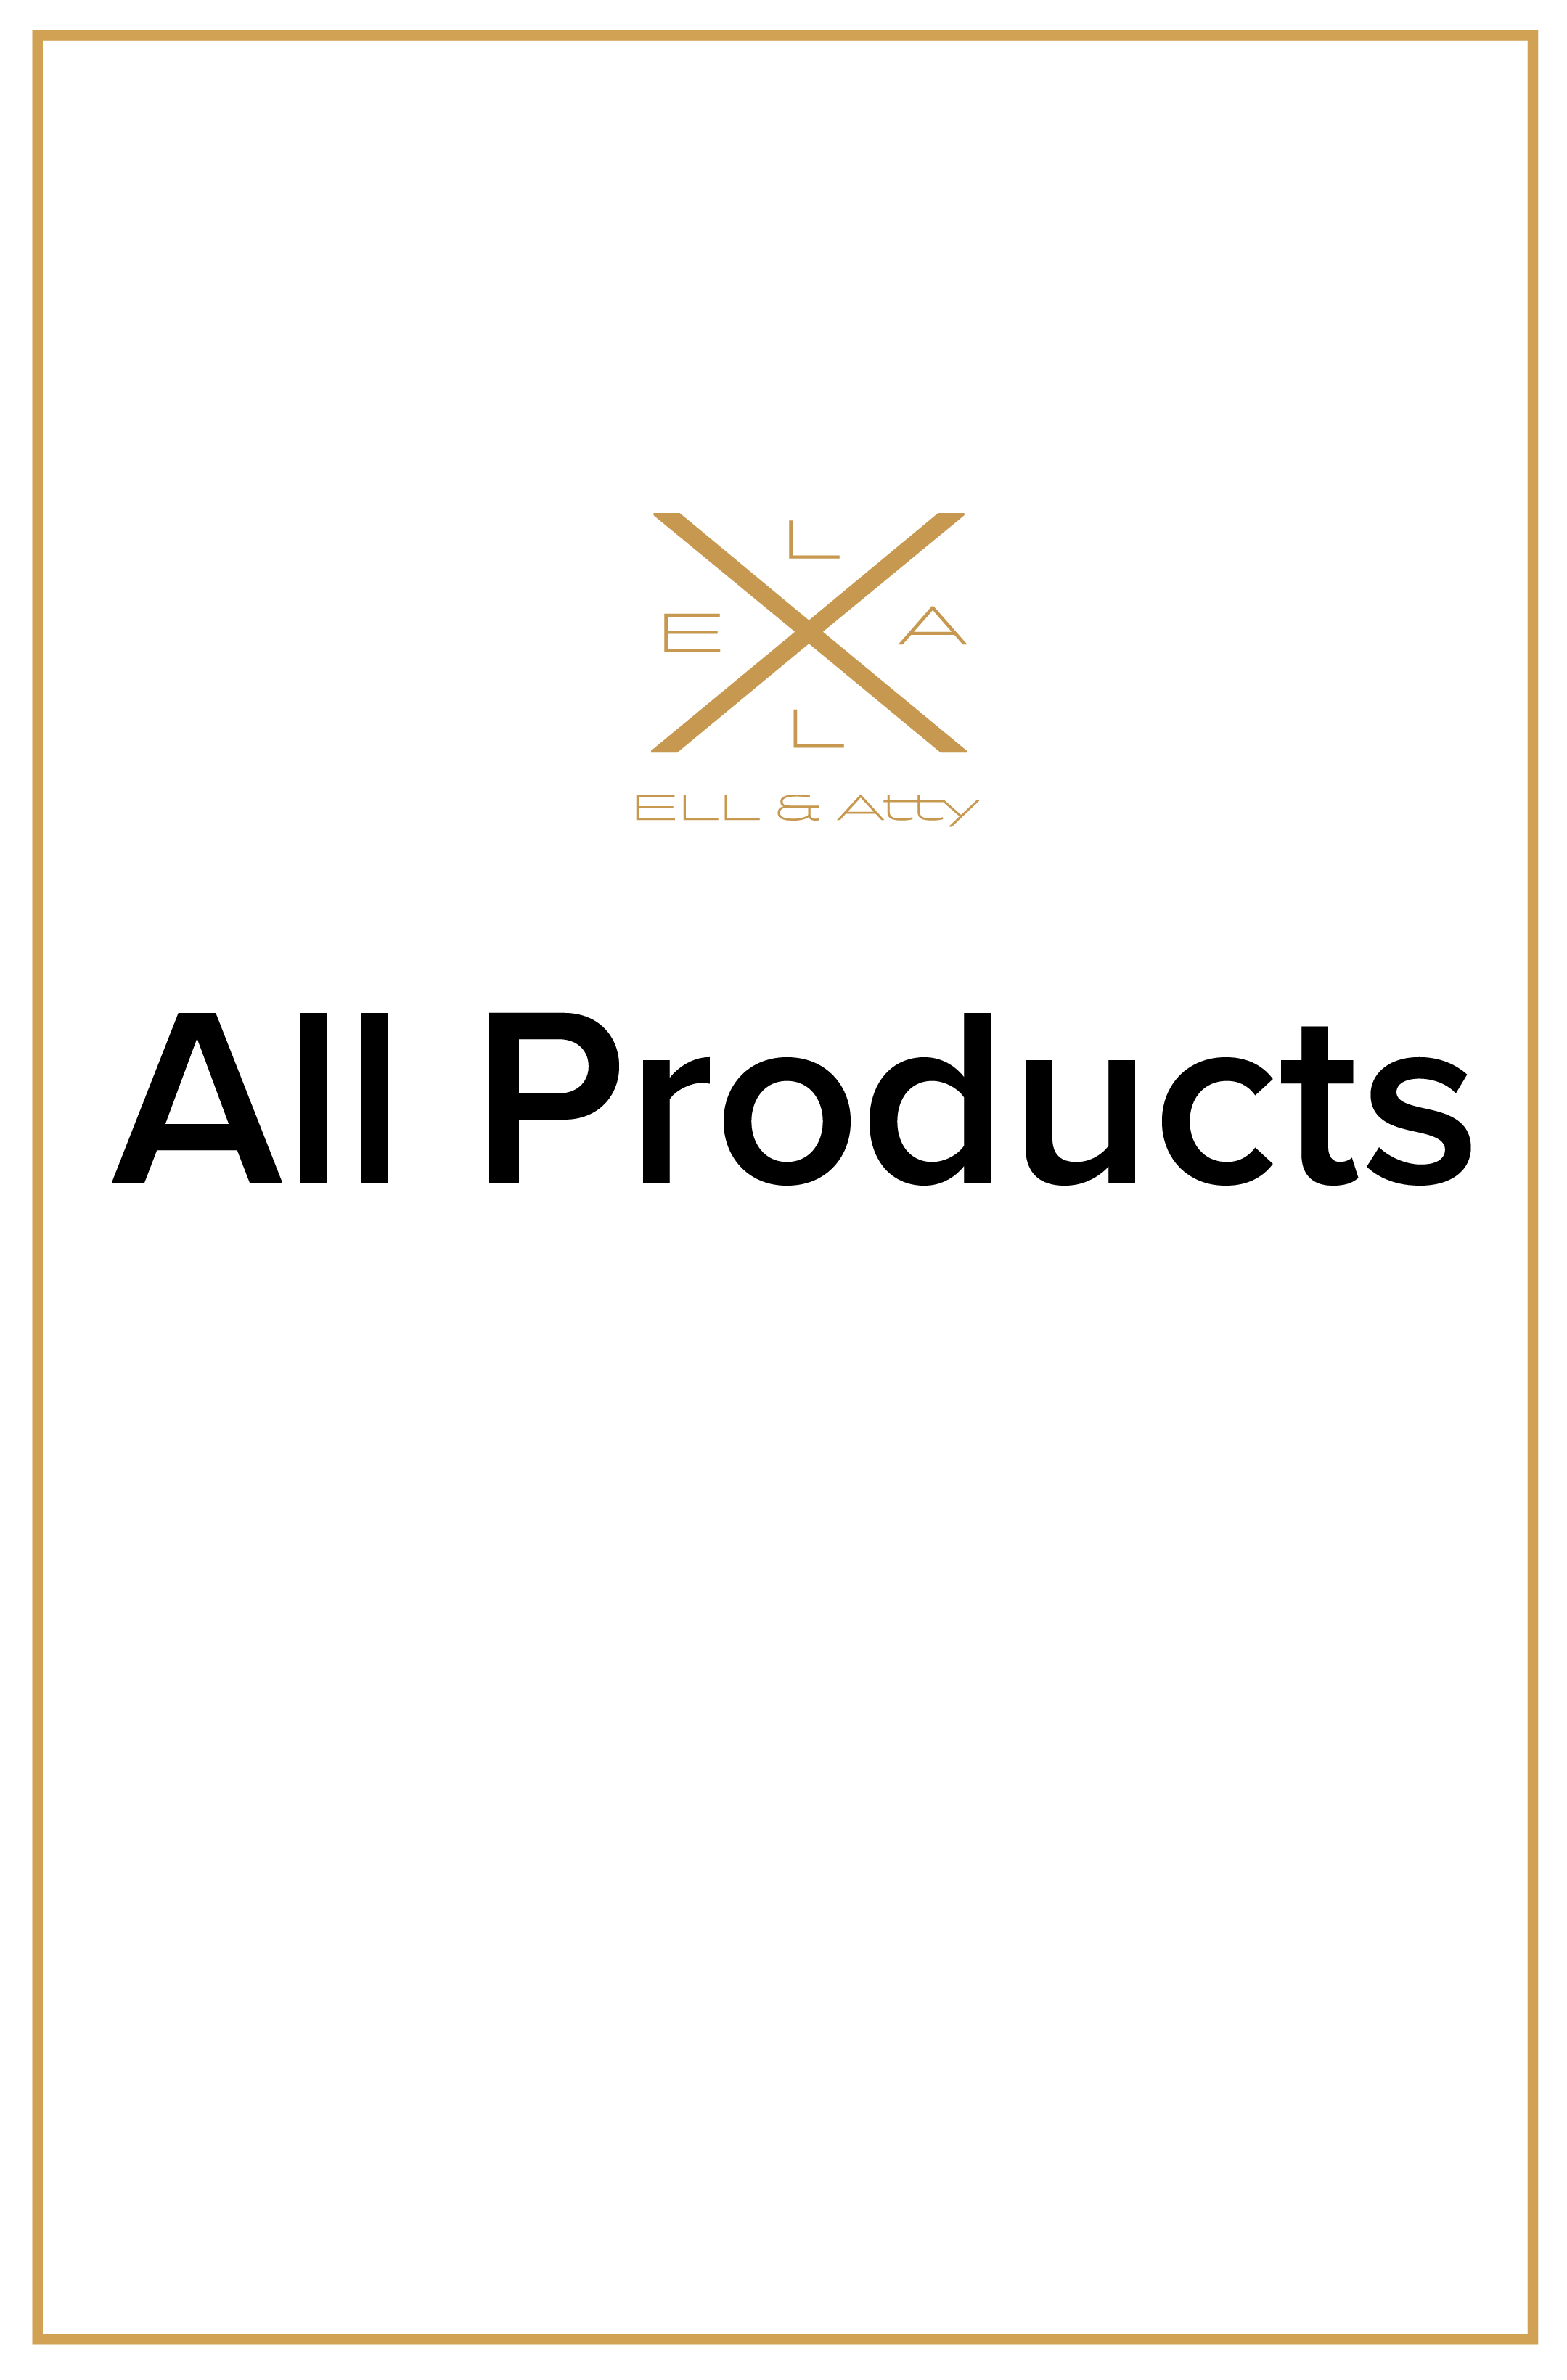 All Products – ELL & Atty